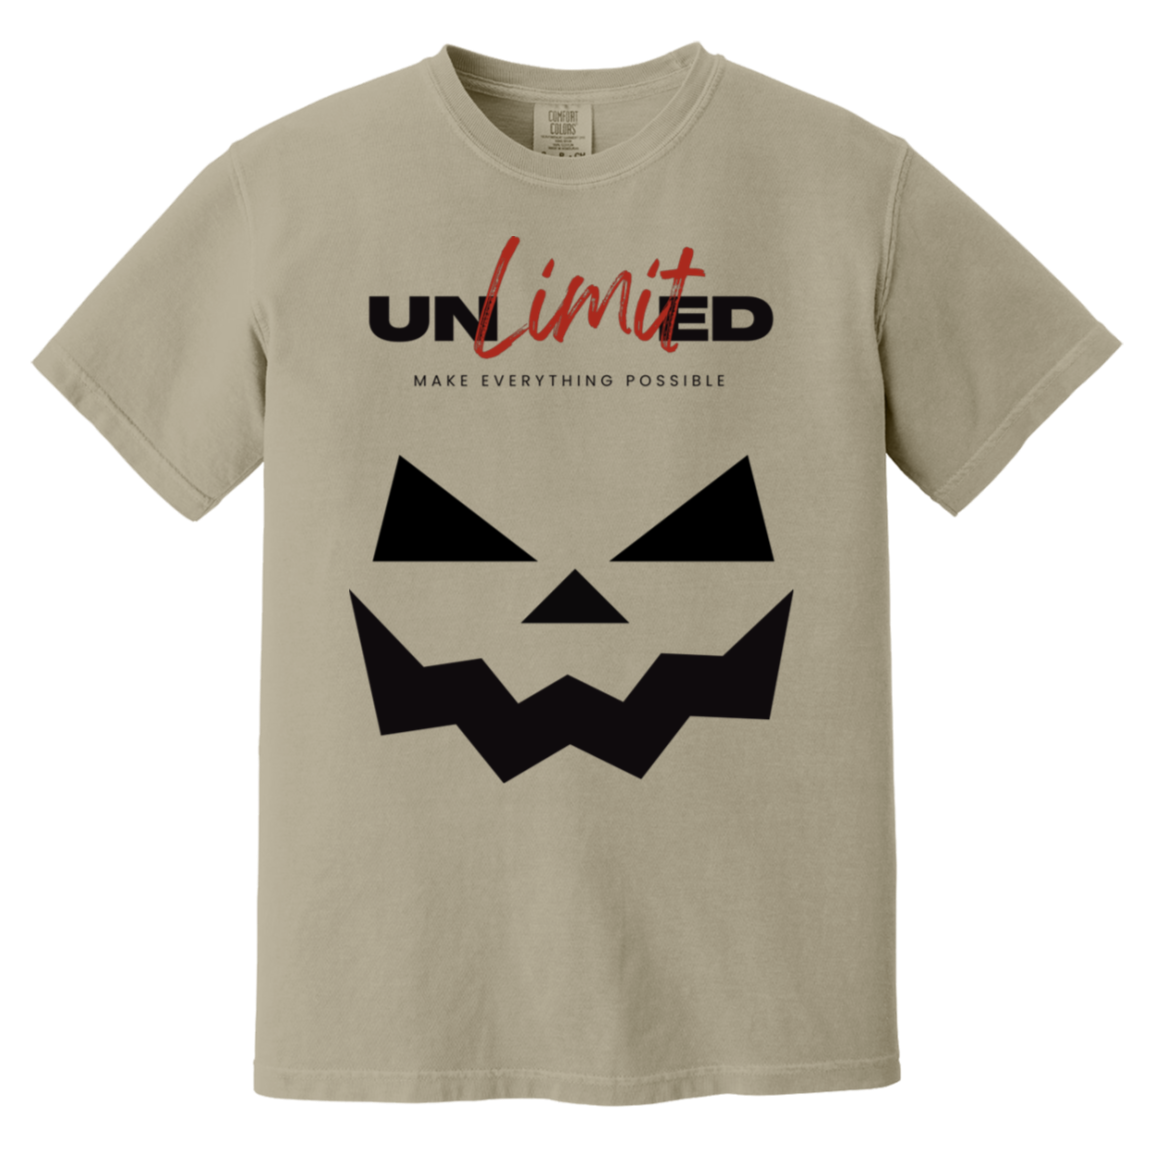 Unlimited Make everything Possible T-Shirt